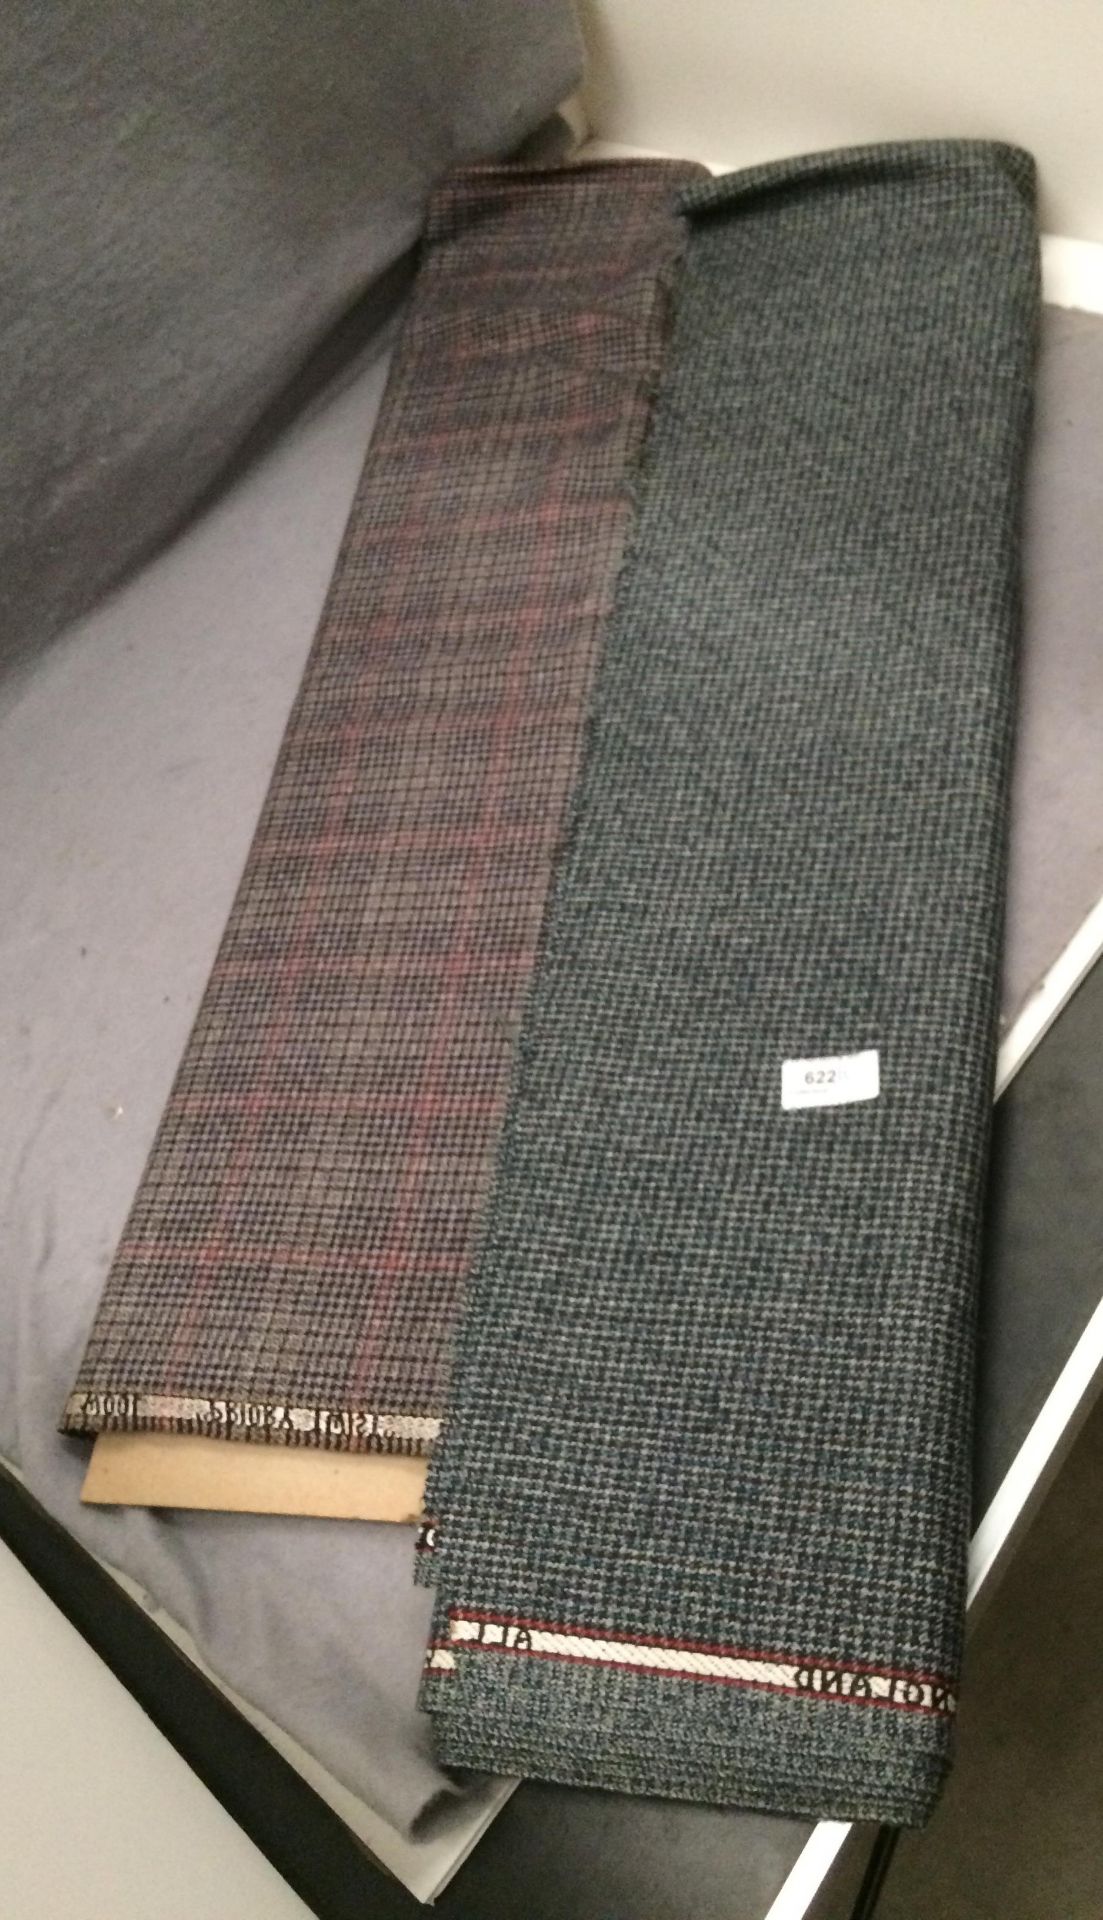 Two part bolts of suit cloth - one all wool Prior Twist made in Huddersfield,